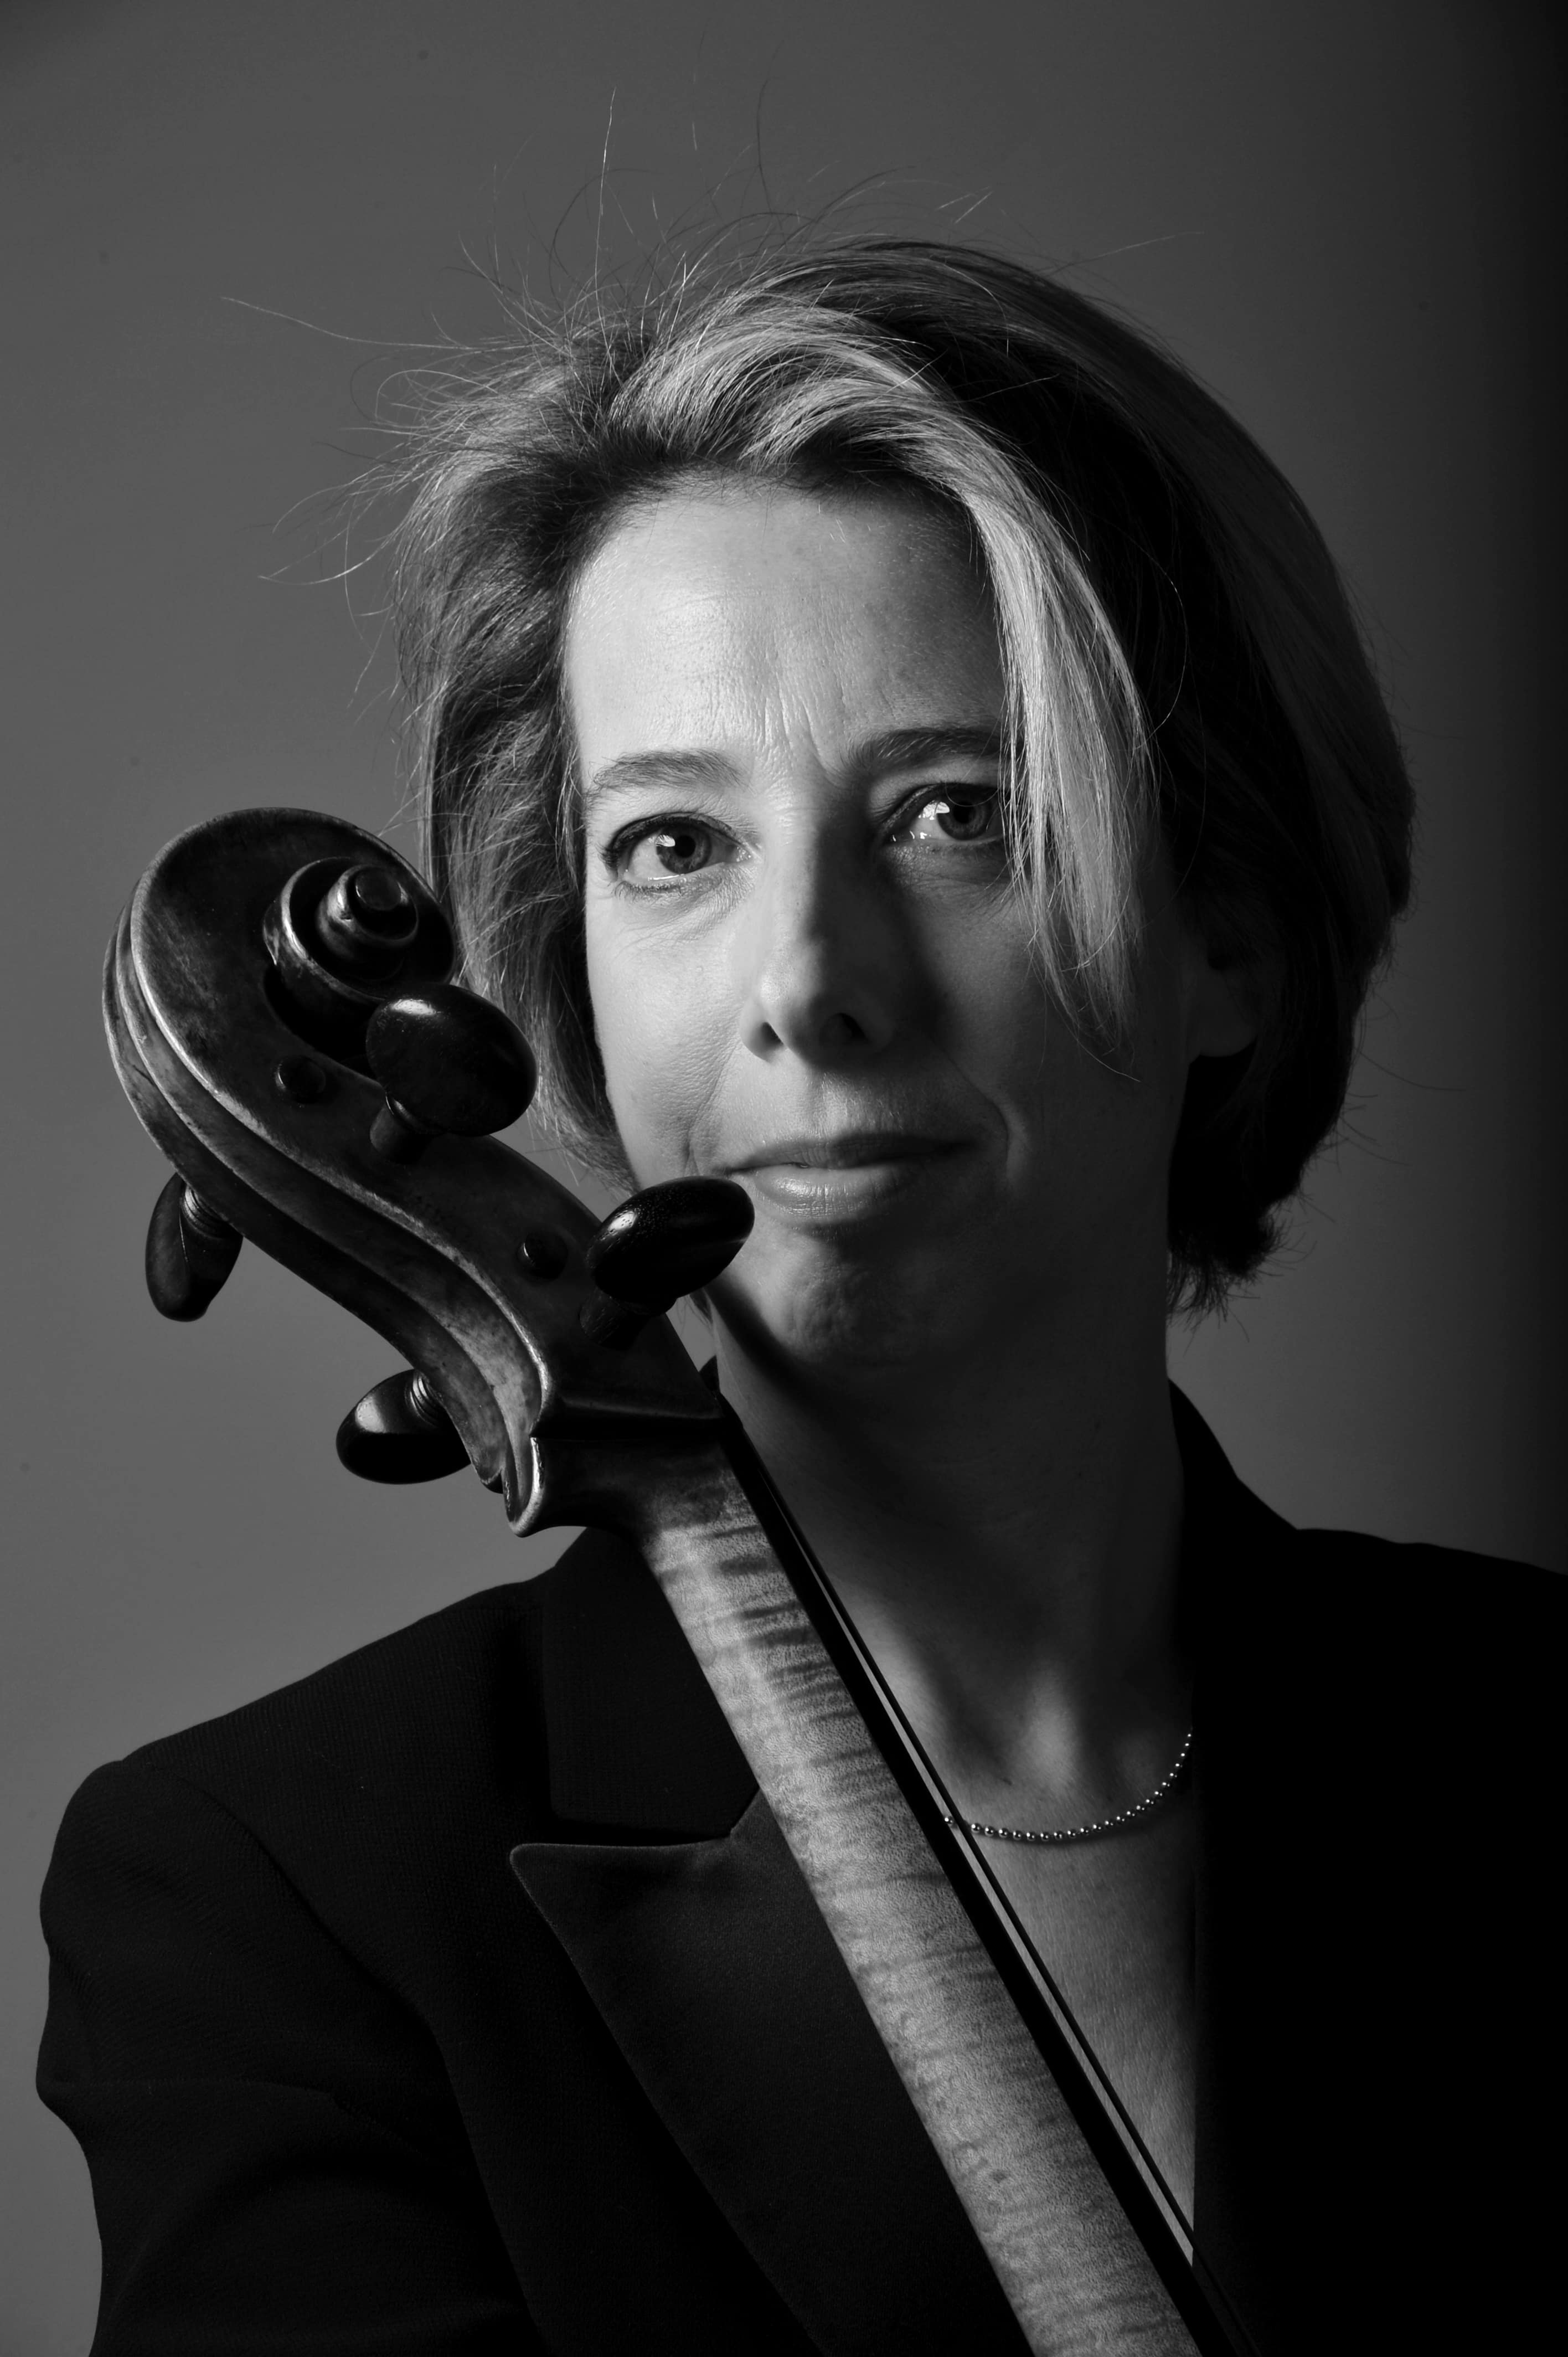 Black and white headshotof Prof Sider wearing a black blazer and holding her cello